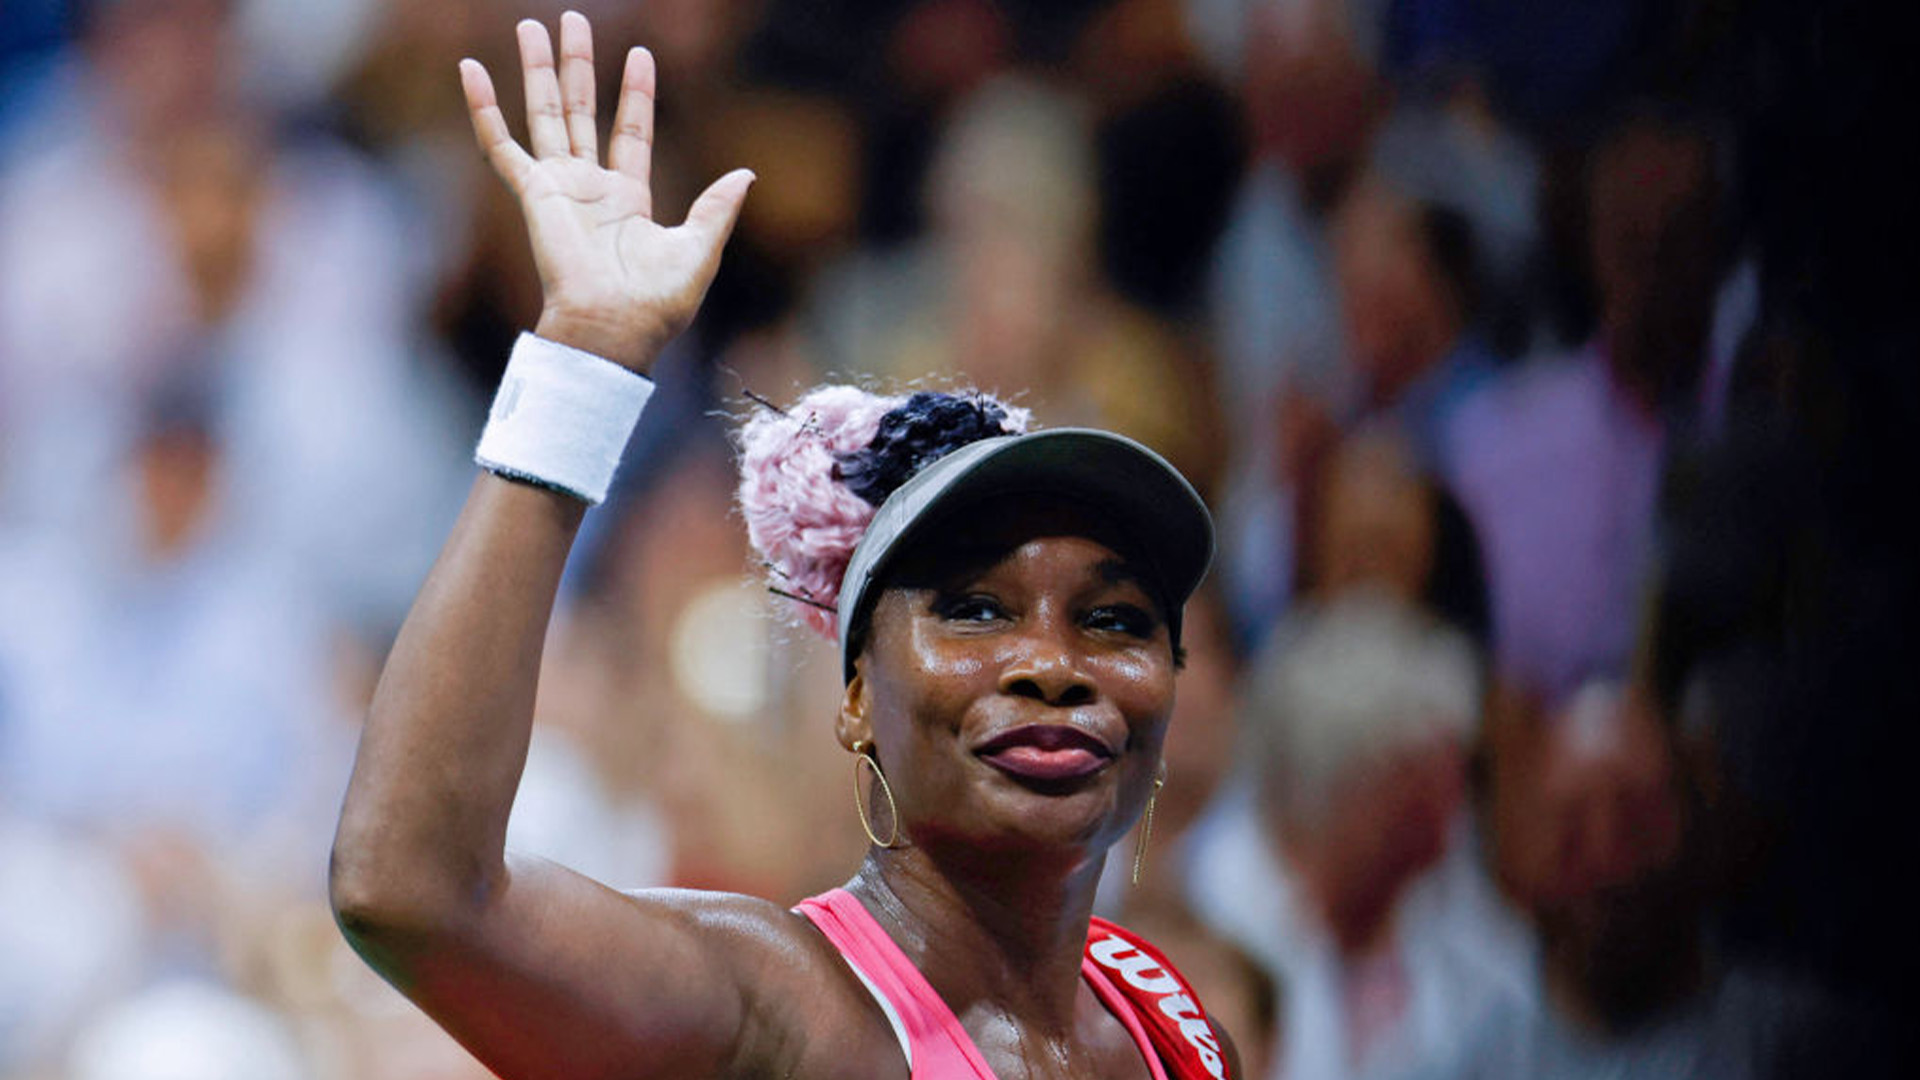 Venus Williams Becomes Co-Founder Of Palazzo, An AI-Based Startup Specializing In Interior Design